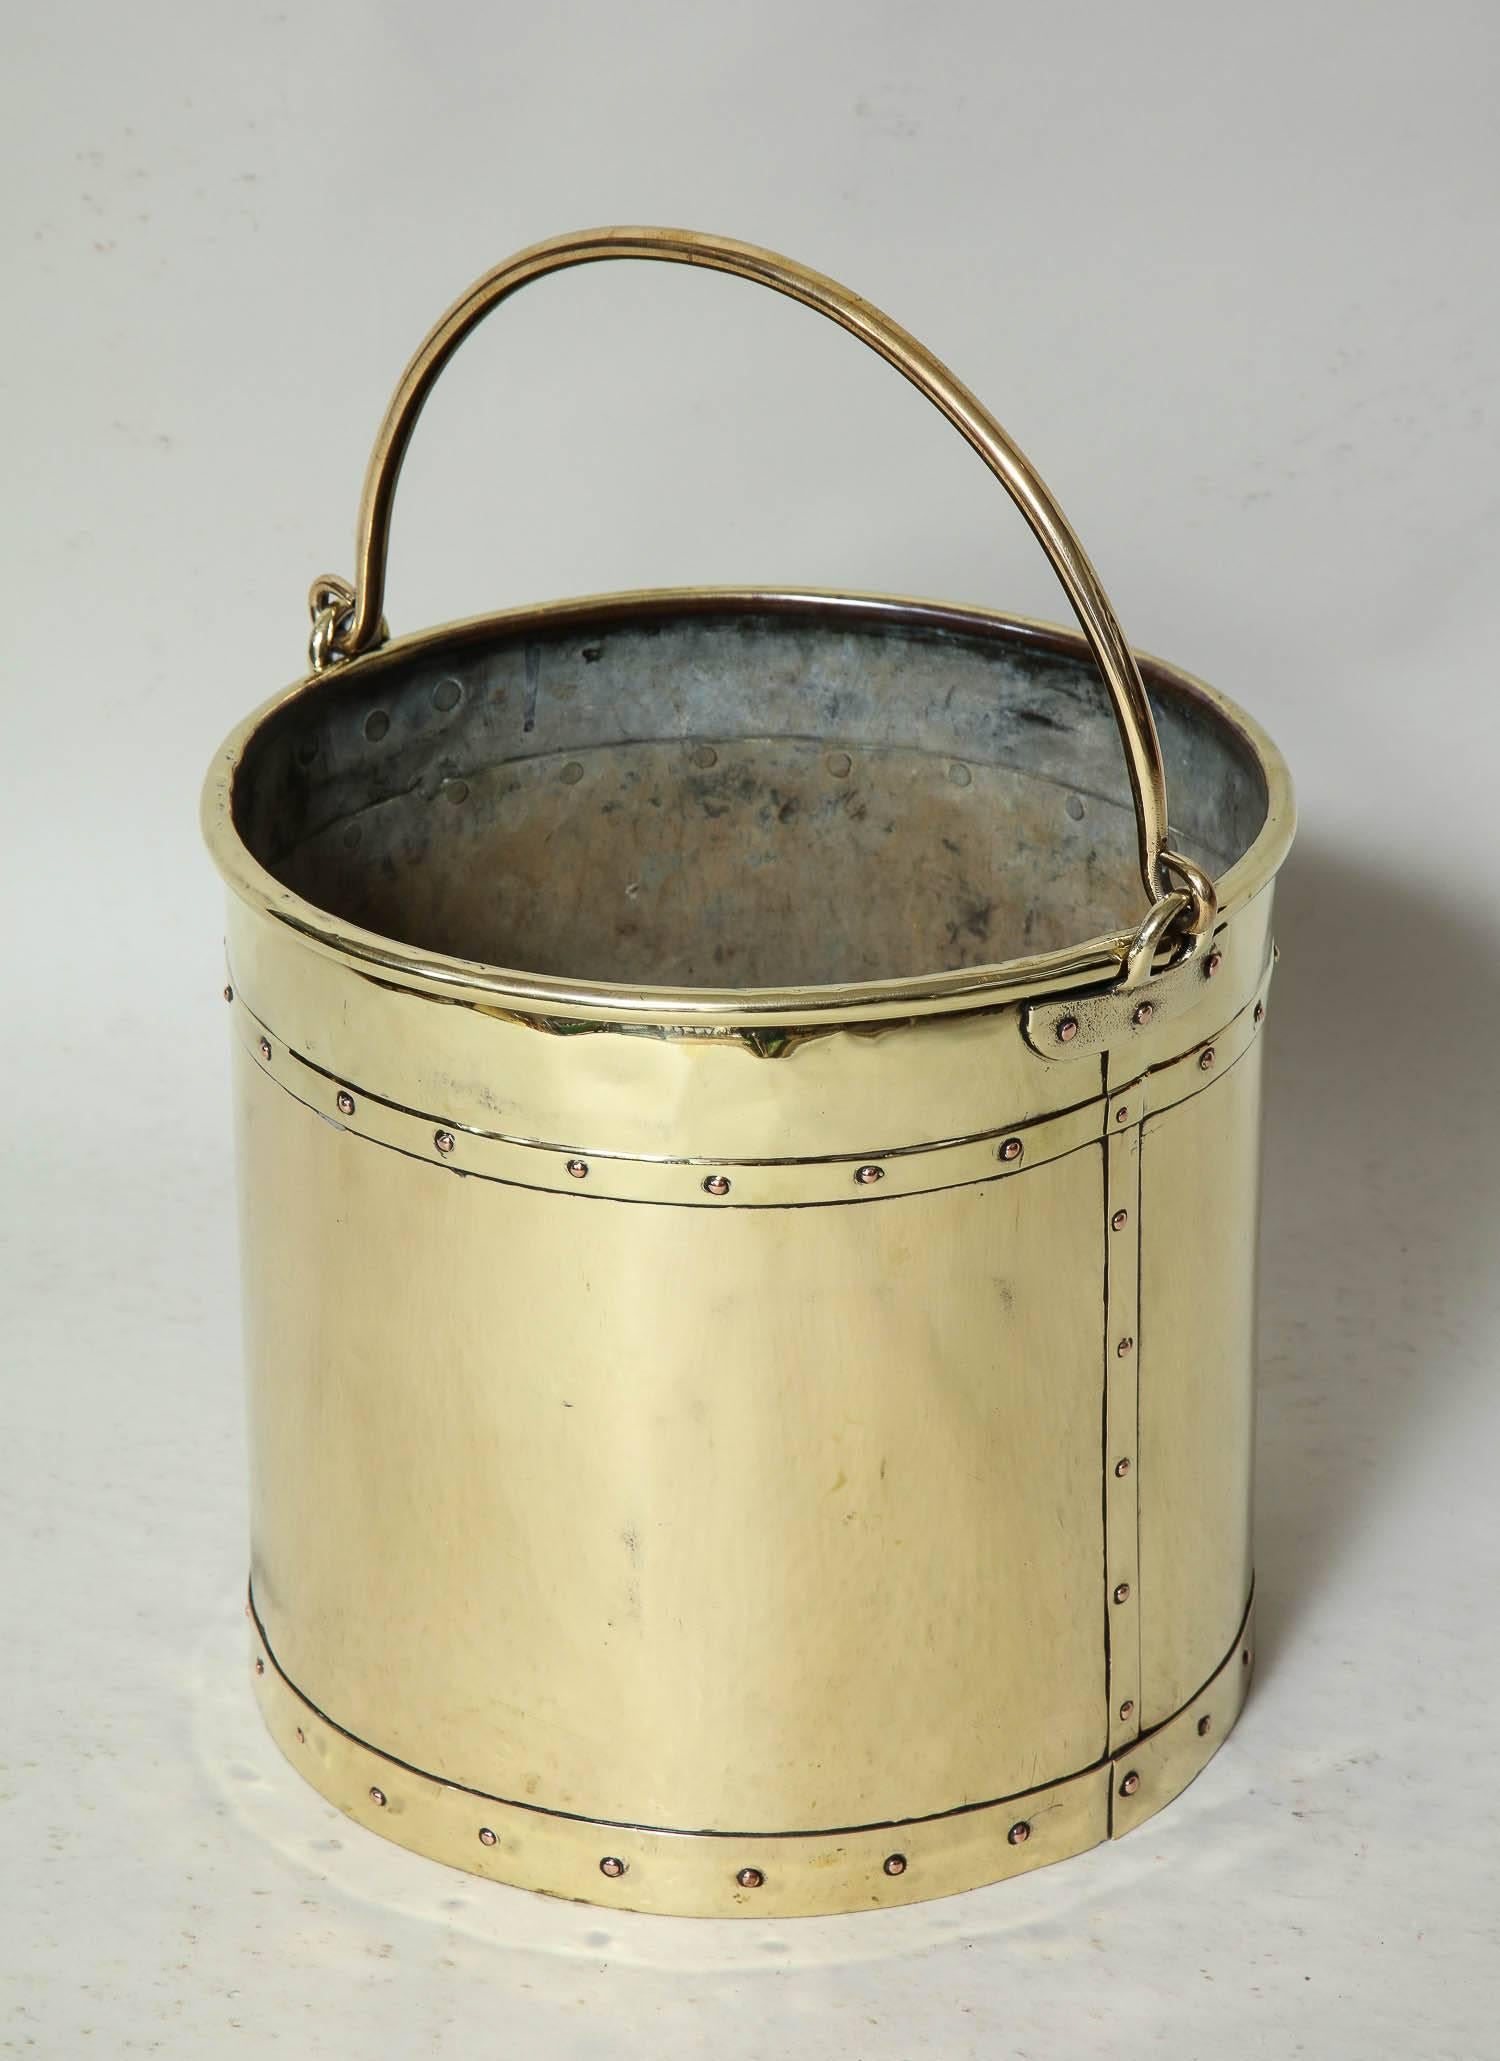 Good English 19th Century brass bucket with brass bail handle, rolled edge and hand-hammered riveted construction. Excellent for kindling or waste paper basket.